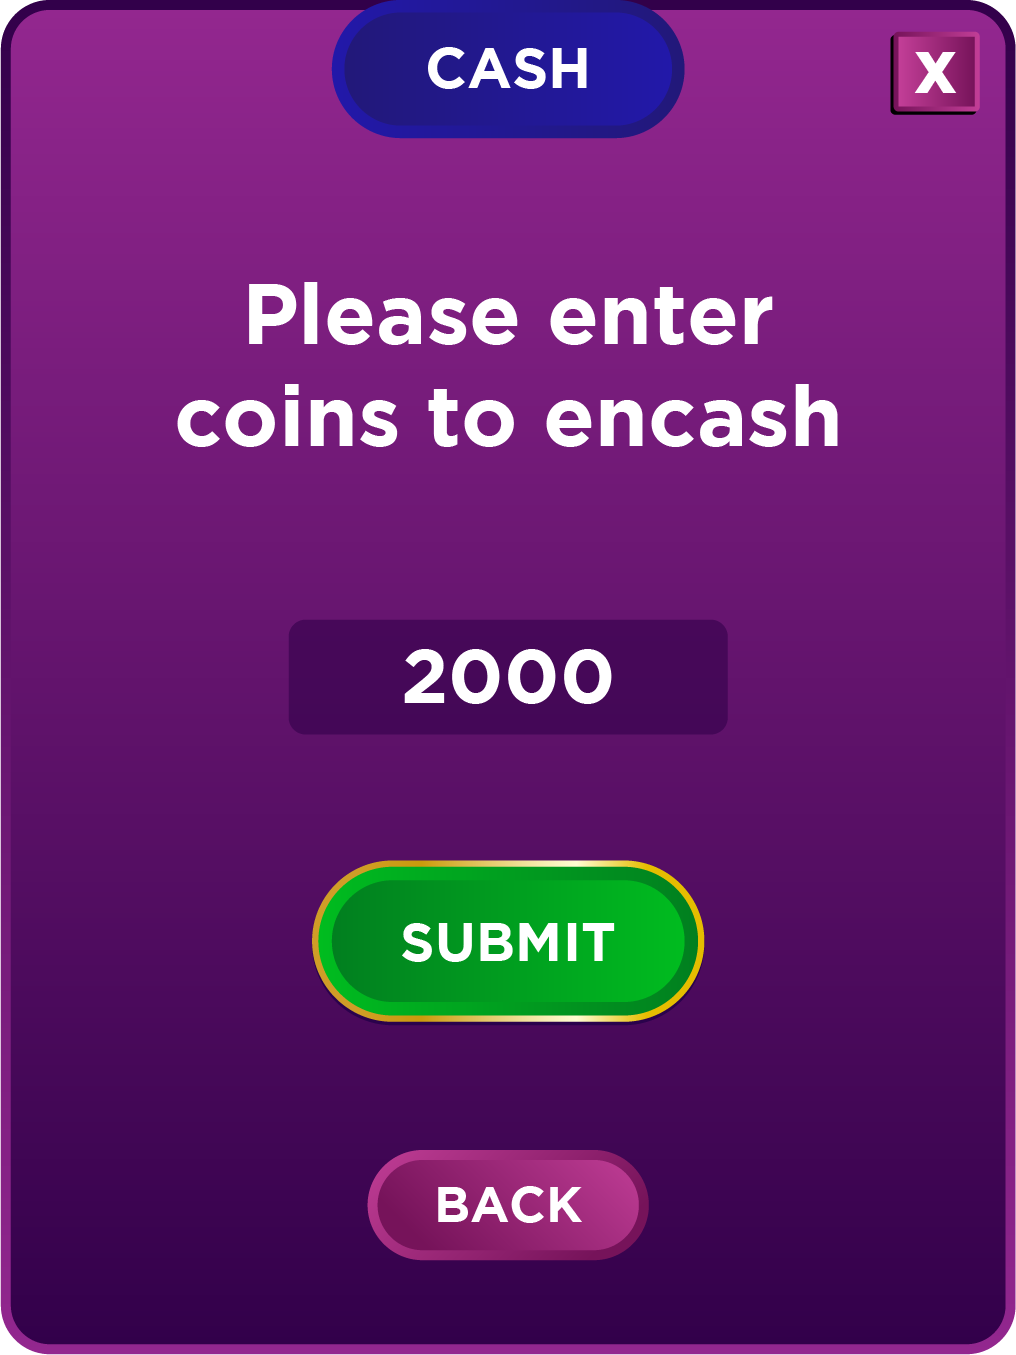 cash-coins-screen-1.png